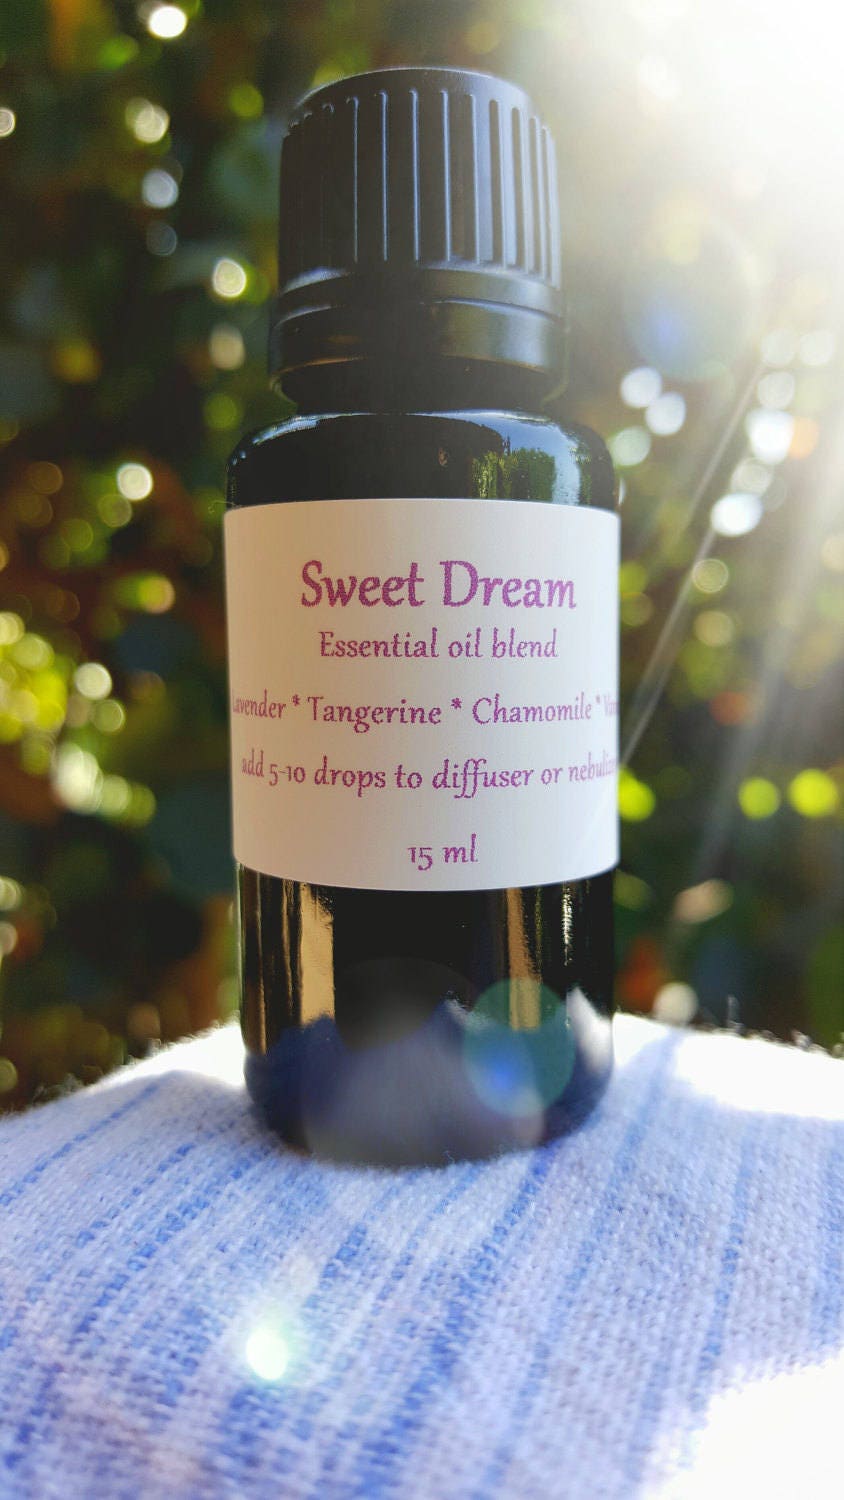 Sweet Dream Essential Oil Diffuser Blend Nigh Time Sleep Aid Anxiety Relief Calming Relaxing Mood Elevating Self Care Organic Relaxation